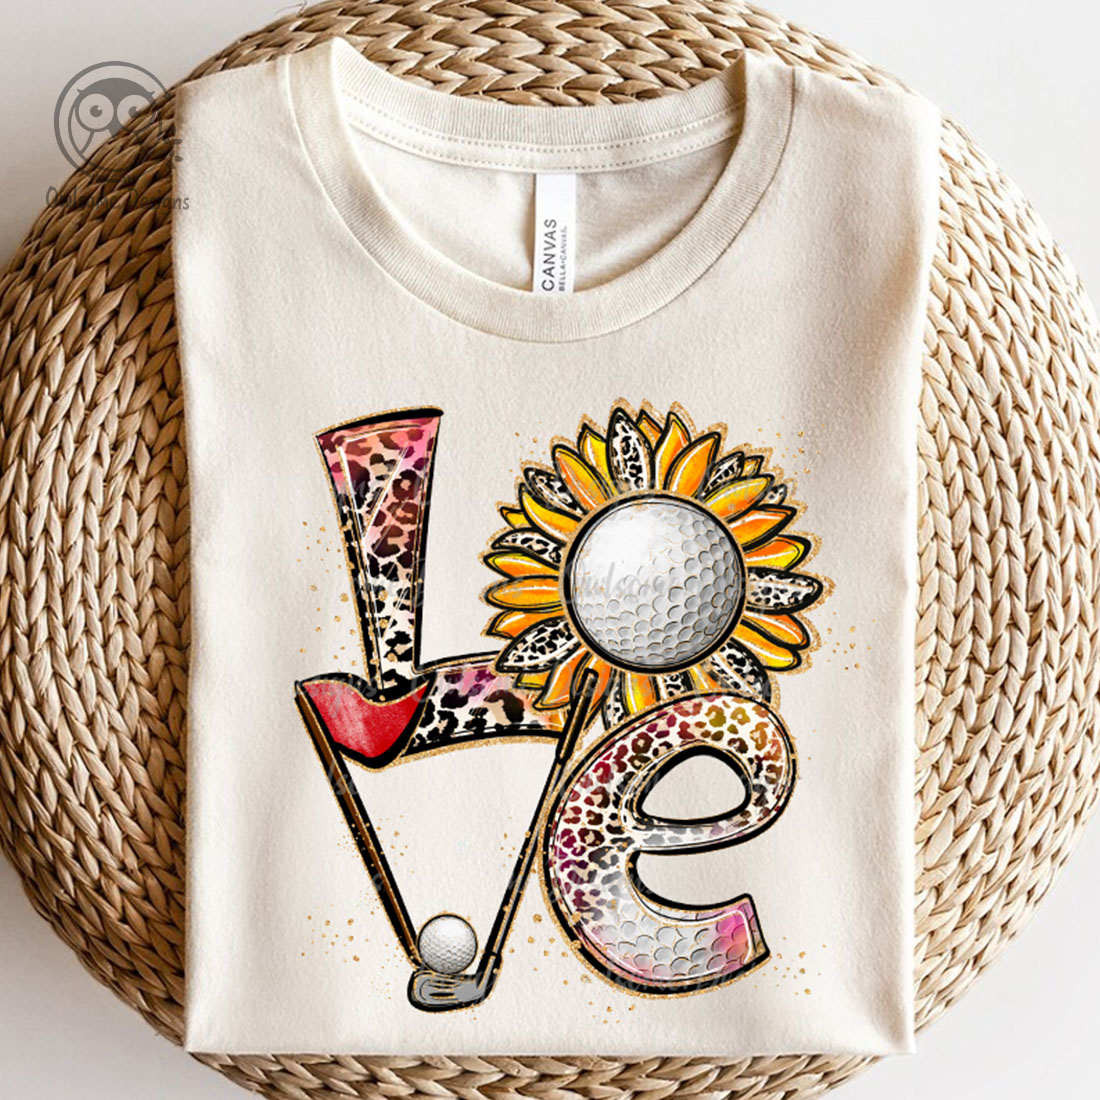 Image of a t-shirt with an enchanting inscription Love with golf elements.